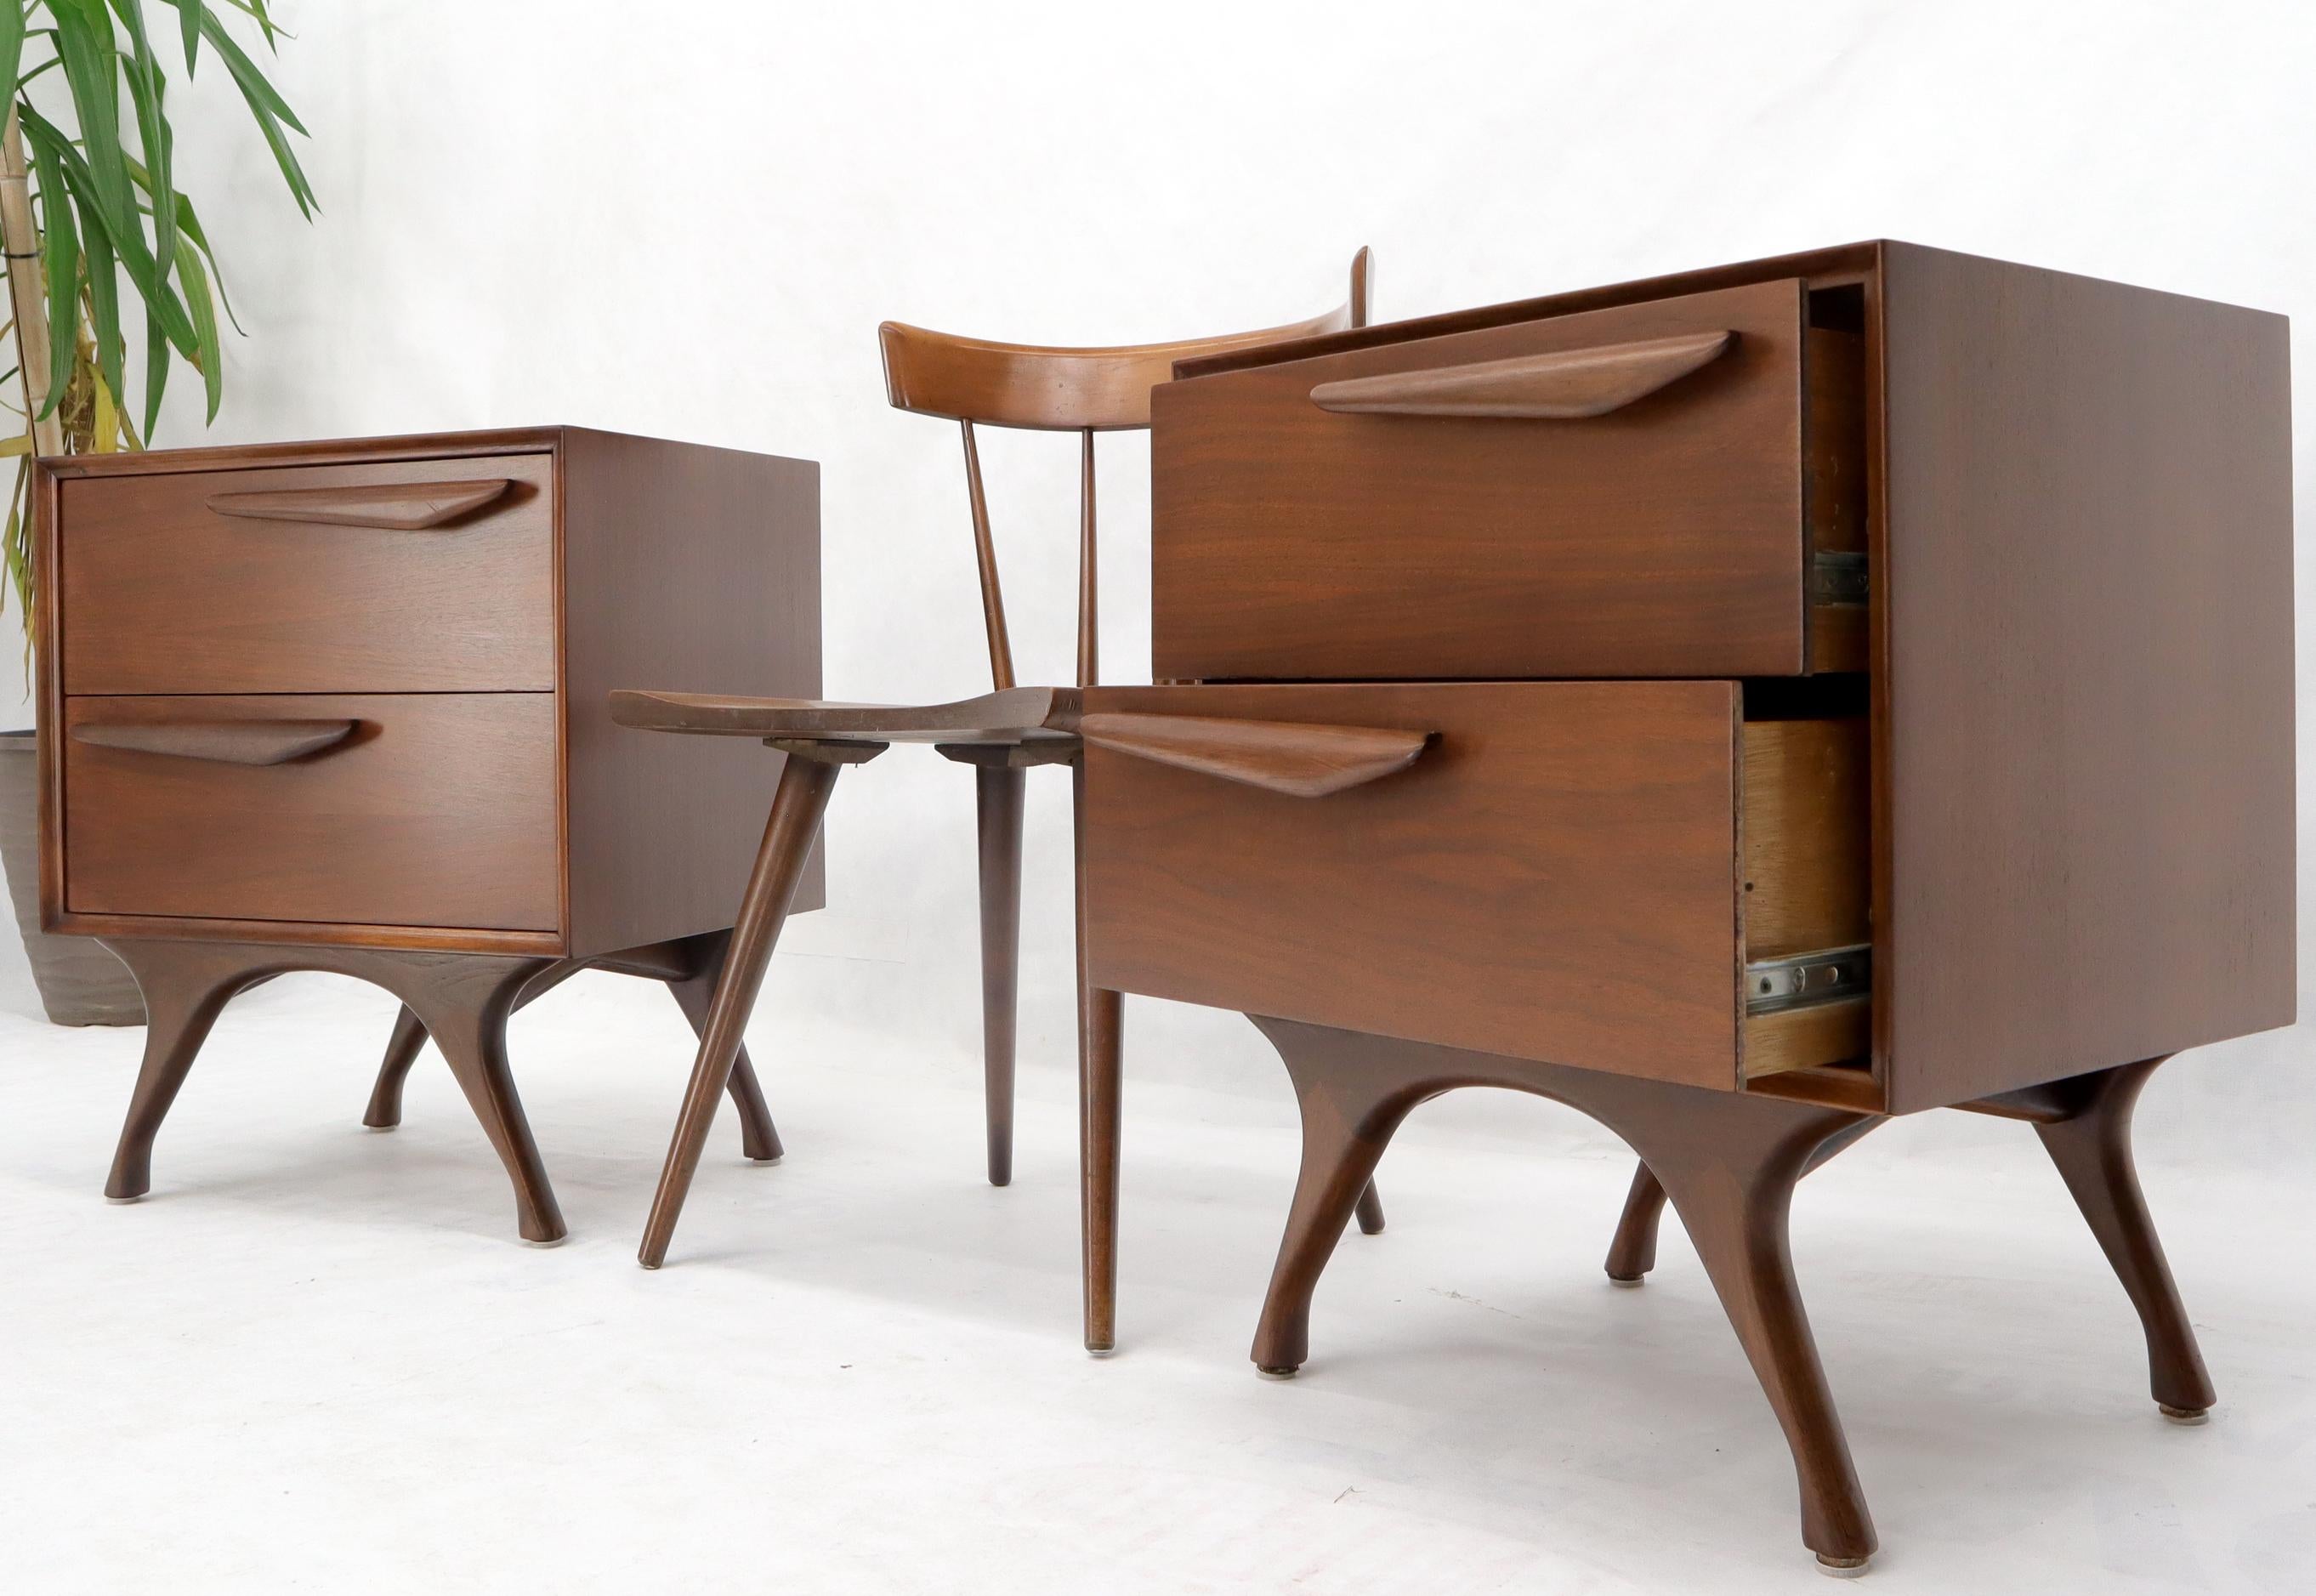 Pair of American Modern Walnut Sculptured Legs Pulls Two Drawers Nightstands For Sale 3